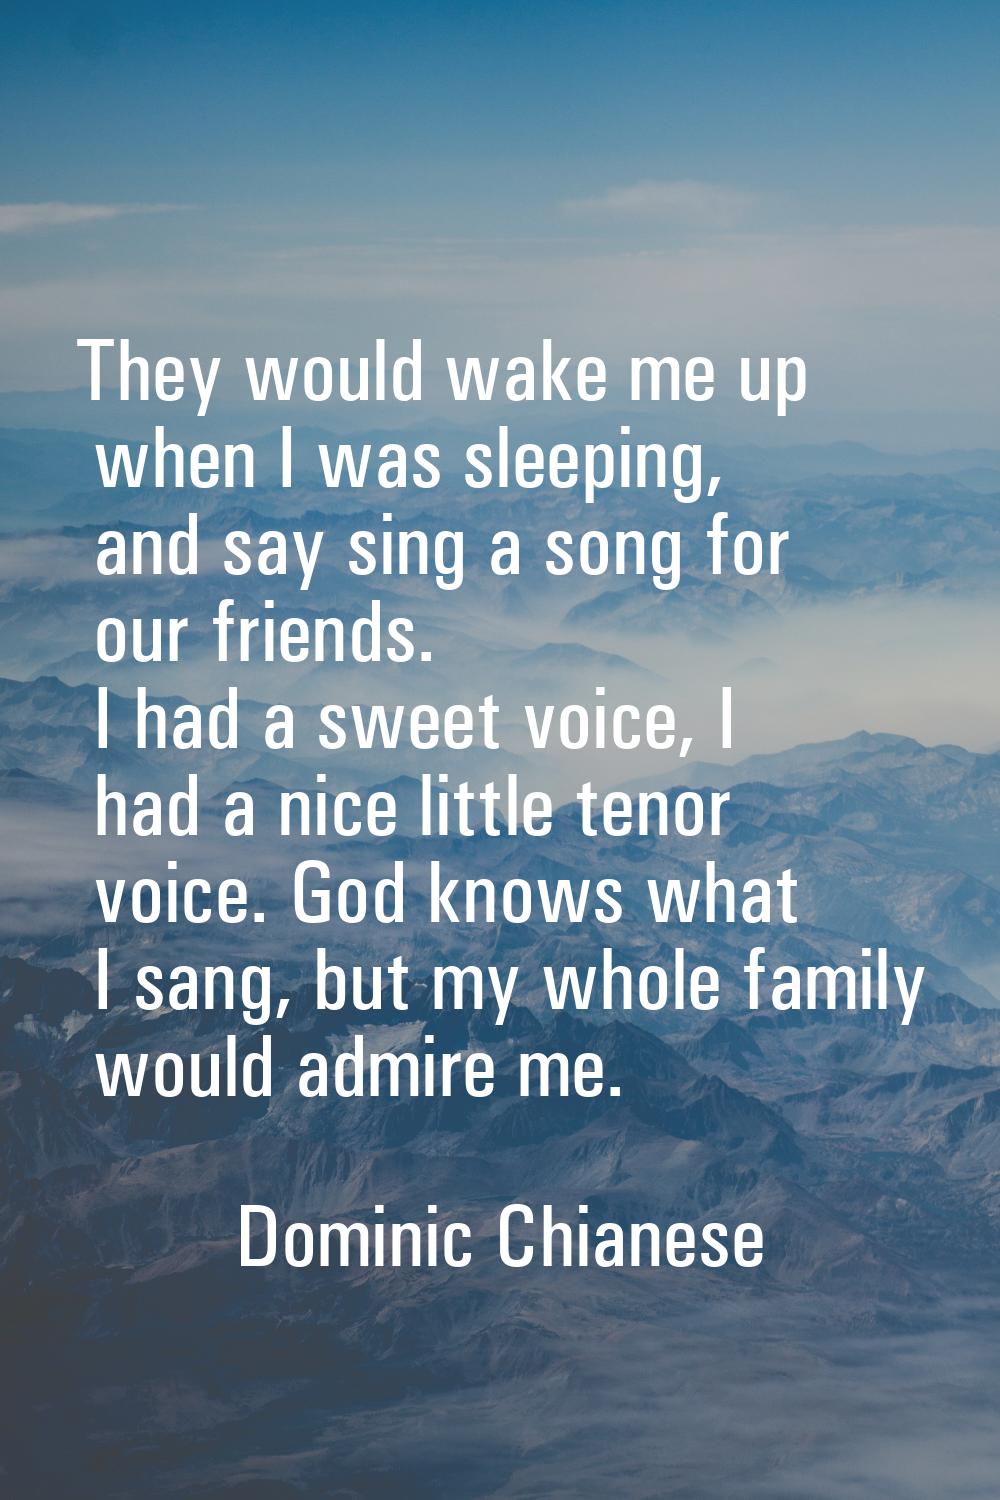 They would wake me up when I was sleeping, and say sing a song for our friends. I had a sweet voice